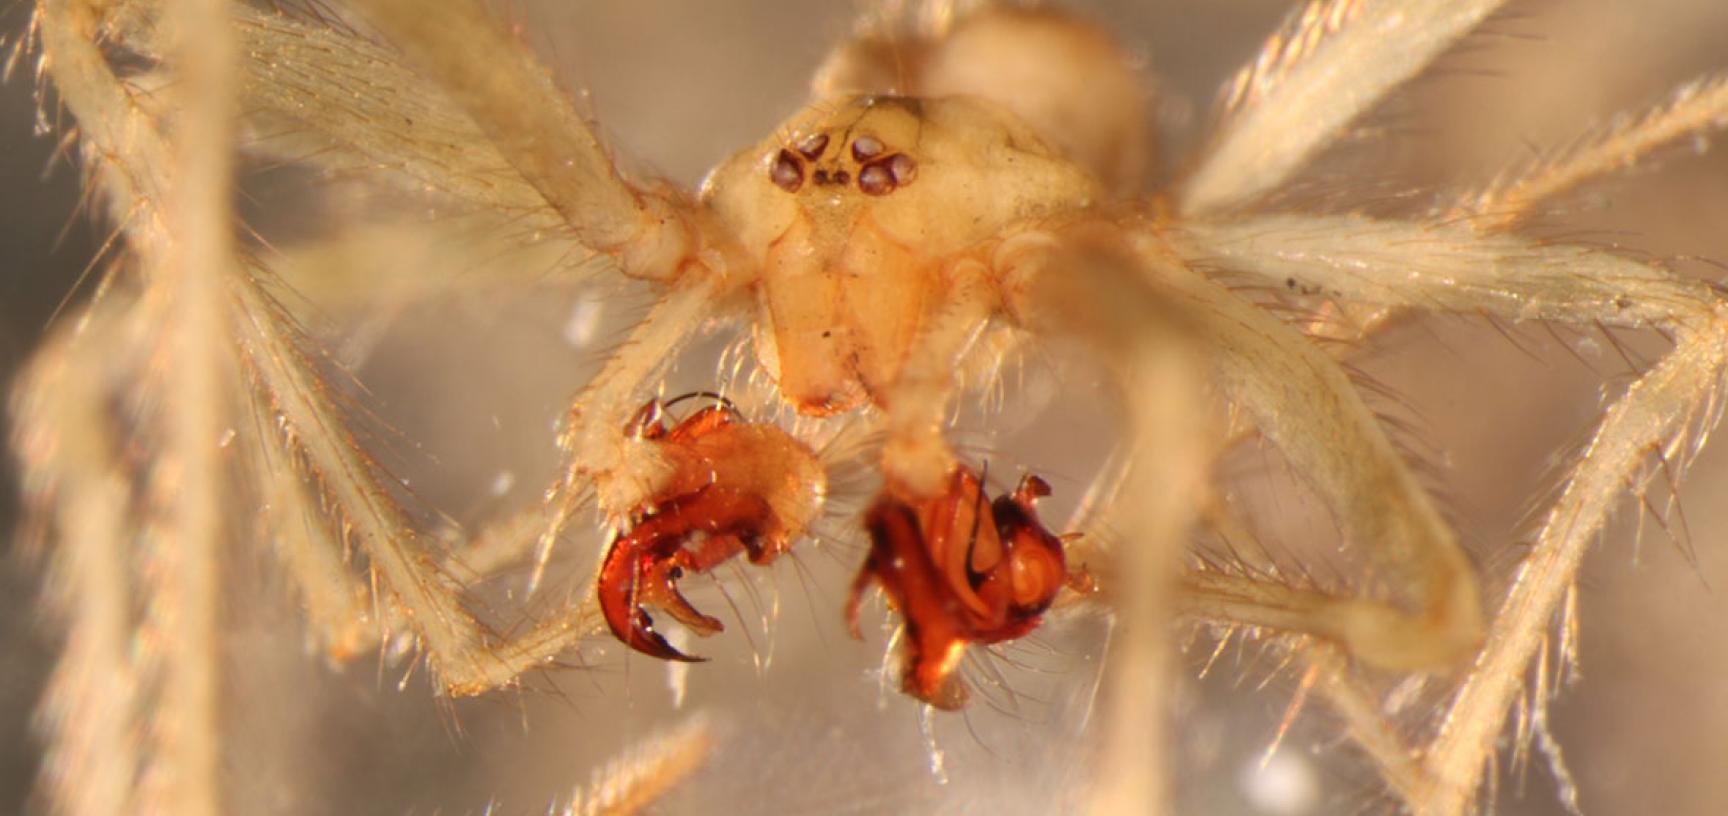 Male Nesticus georgia, with elaborately structured palps used to transfer sperm